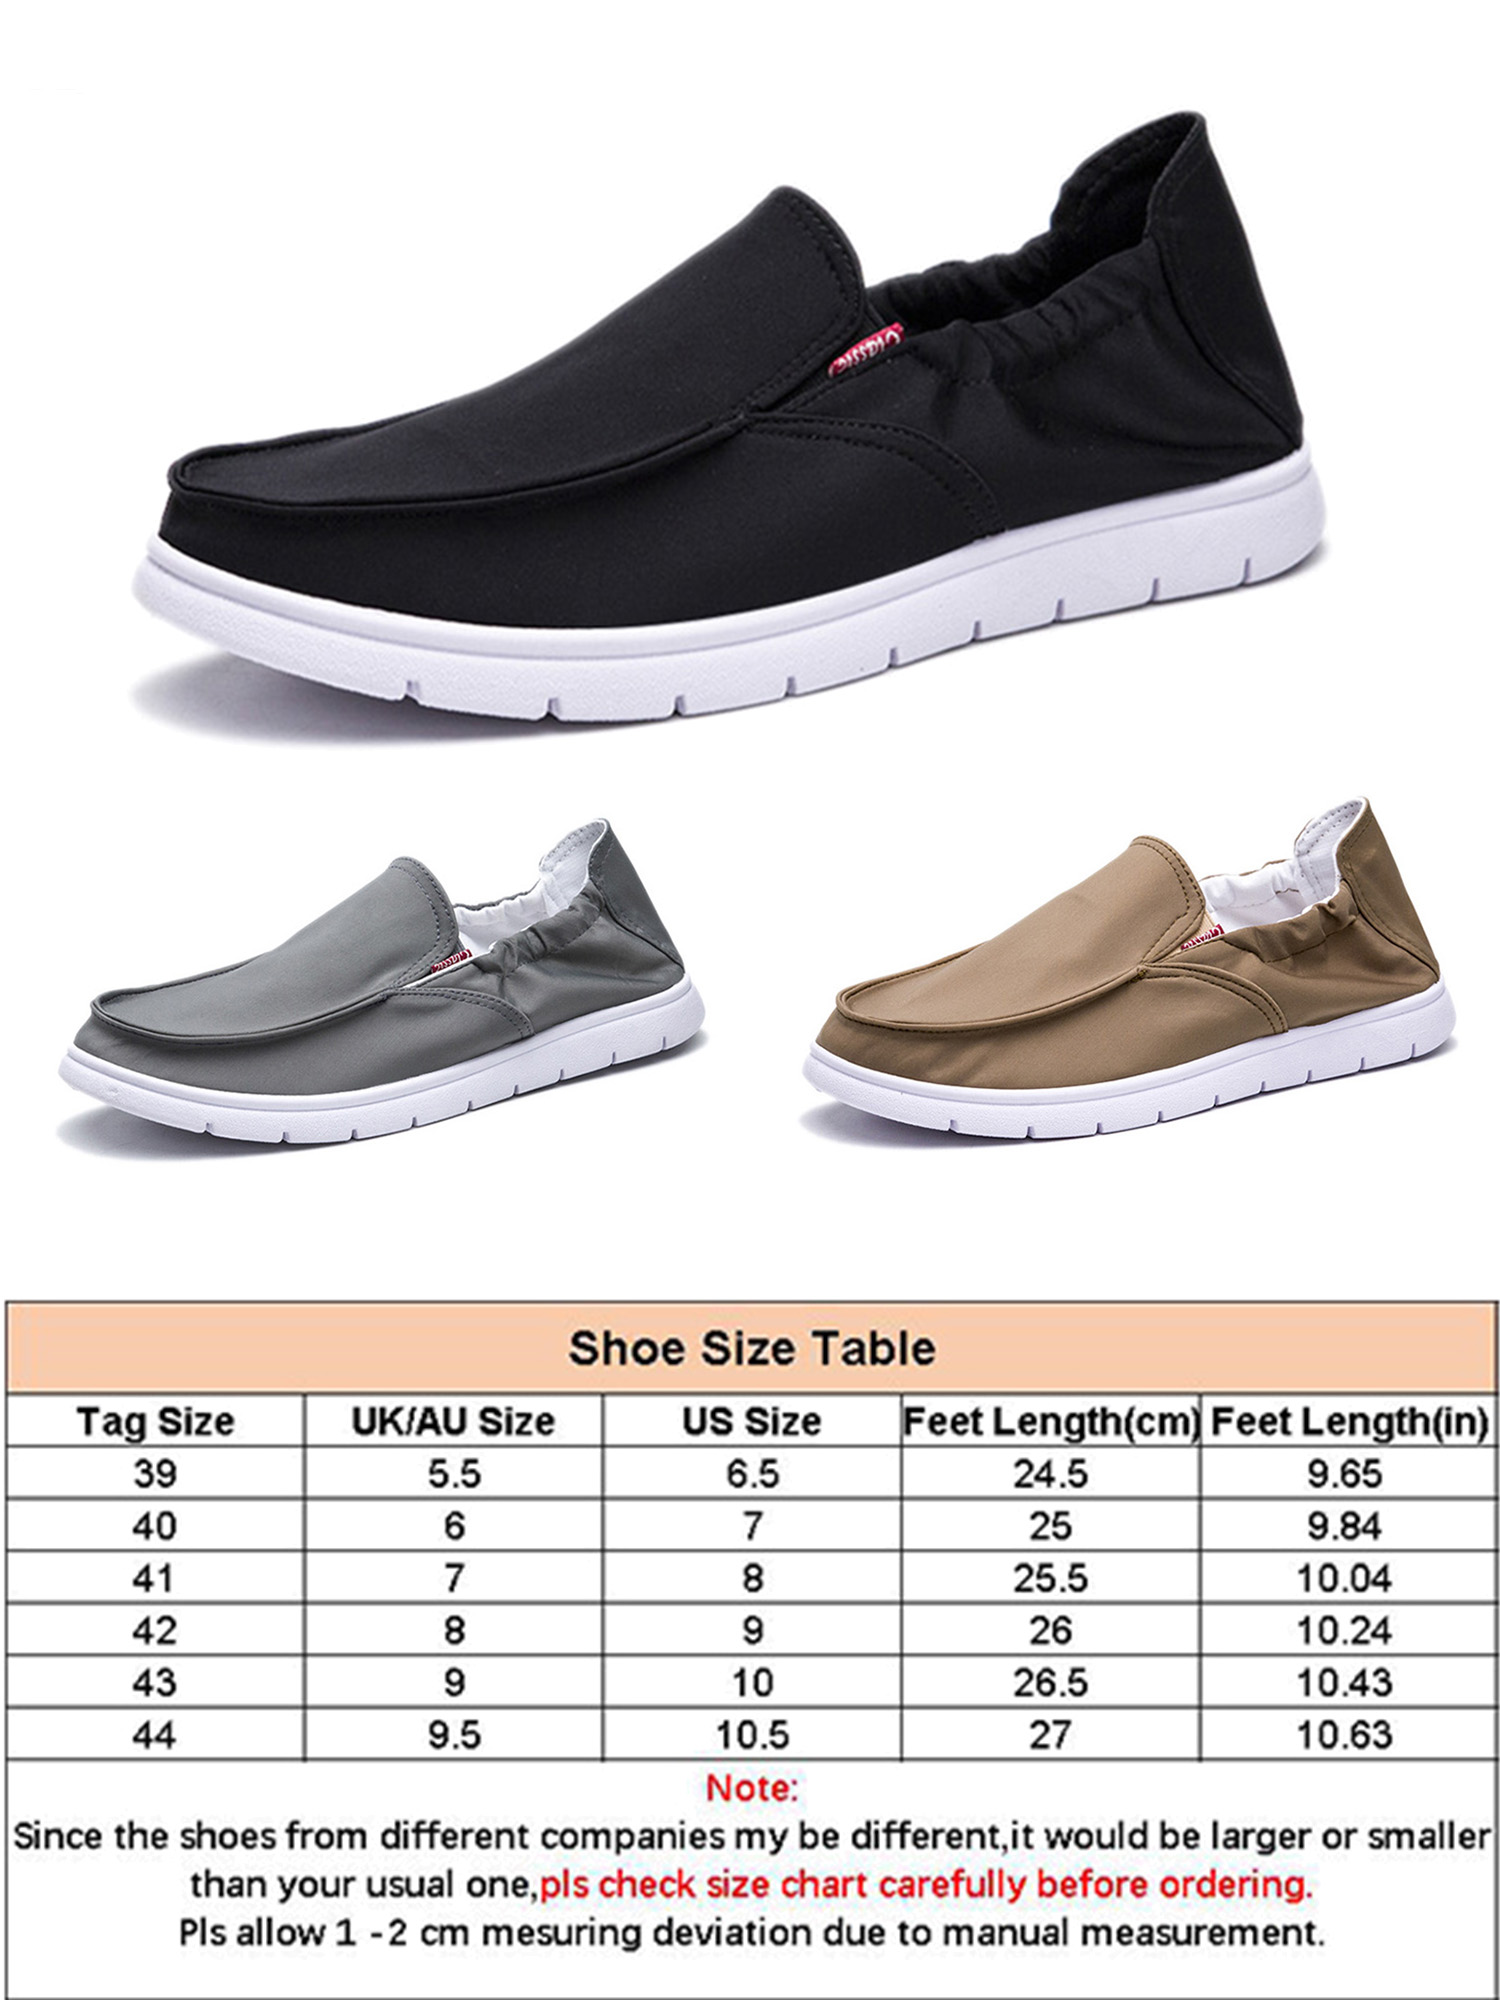 UKAP Mens Shoes Classic Casual Shoes Comfortable Loafers Slip on Boat Shoes - image 2 of 5